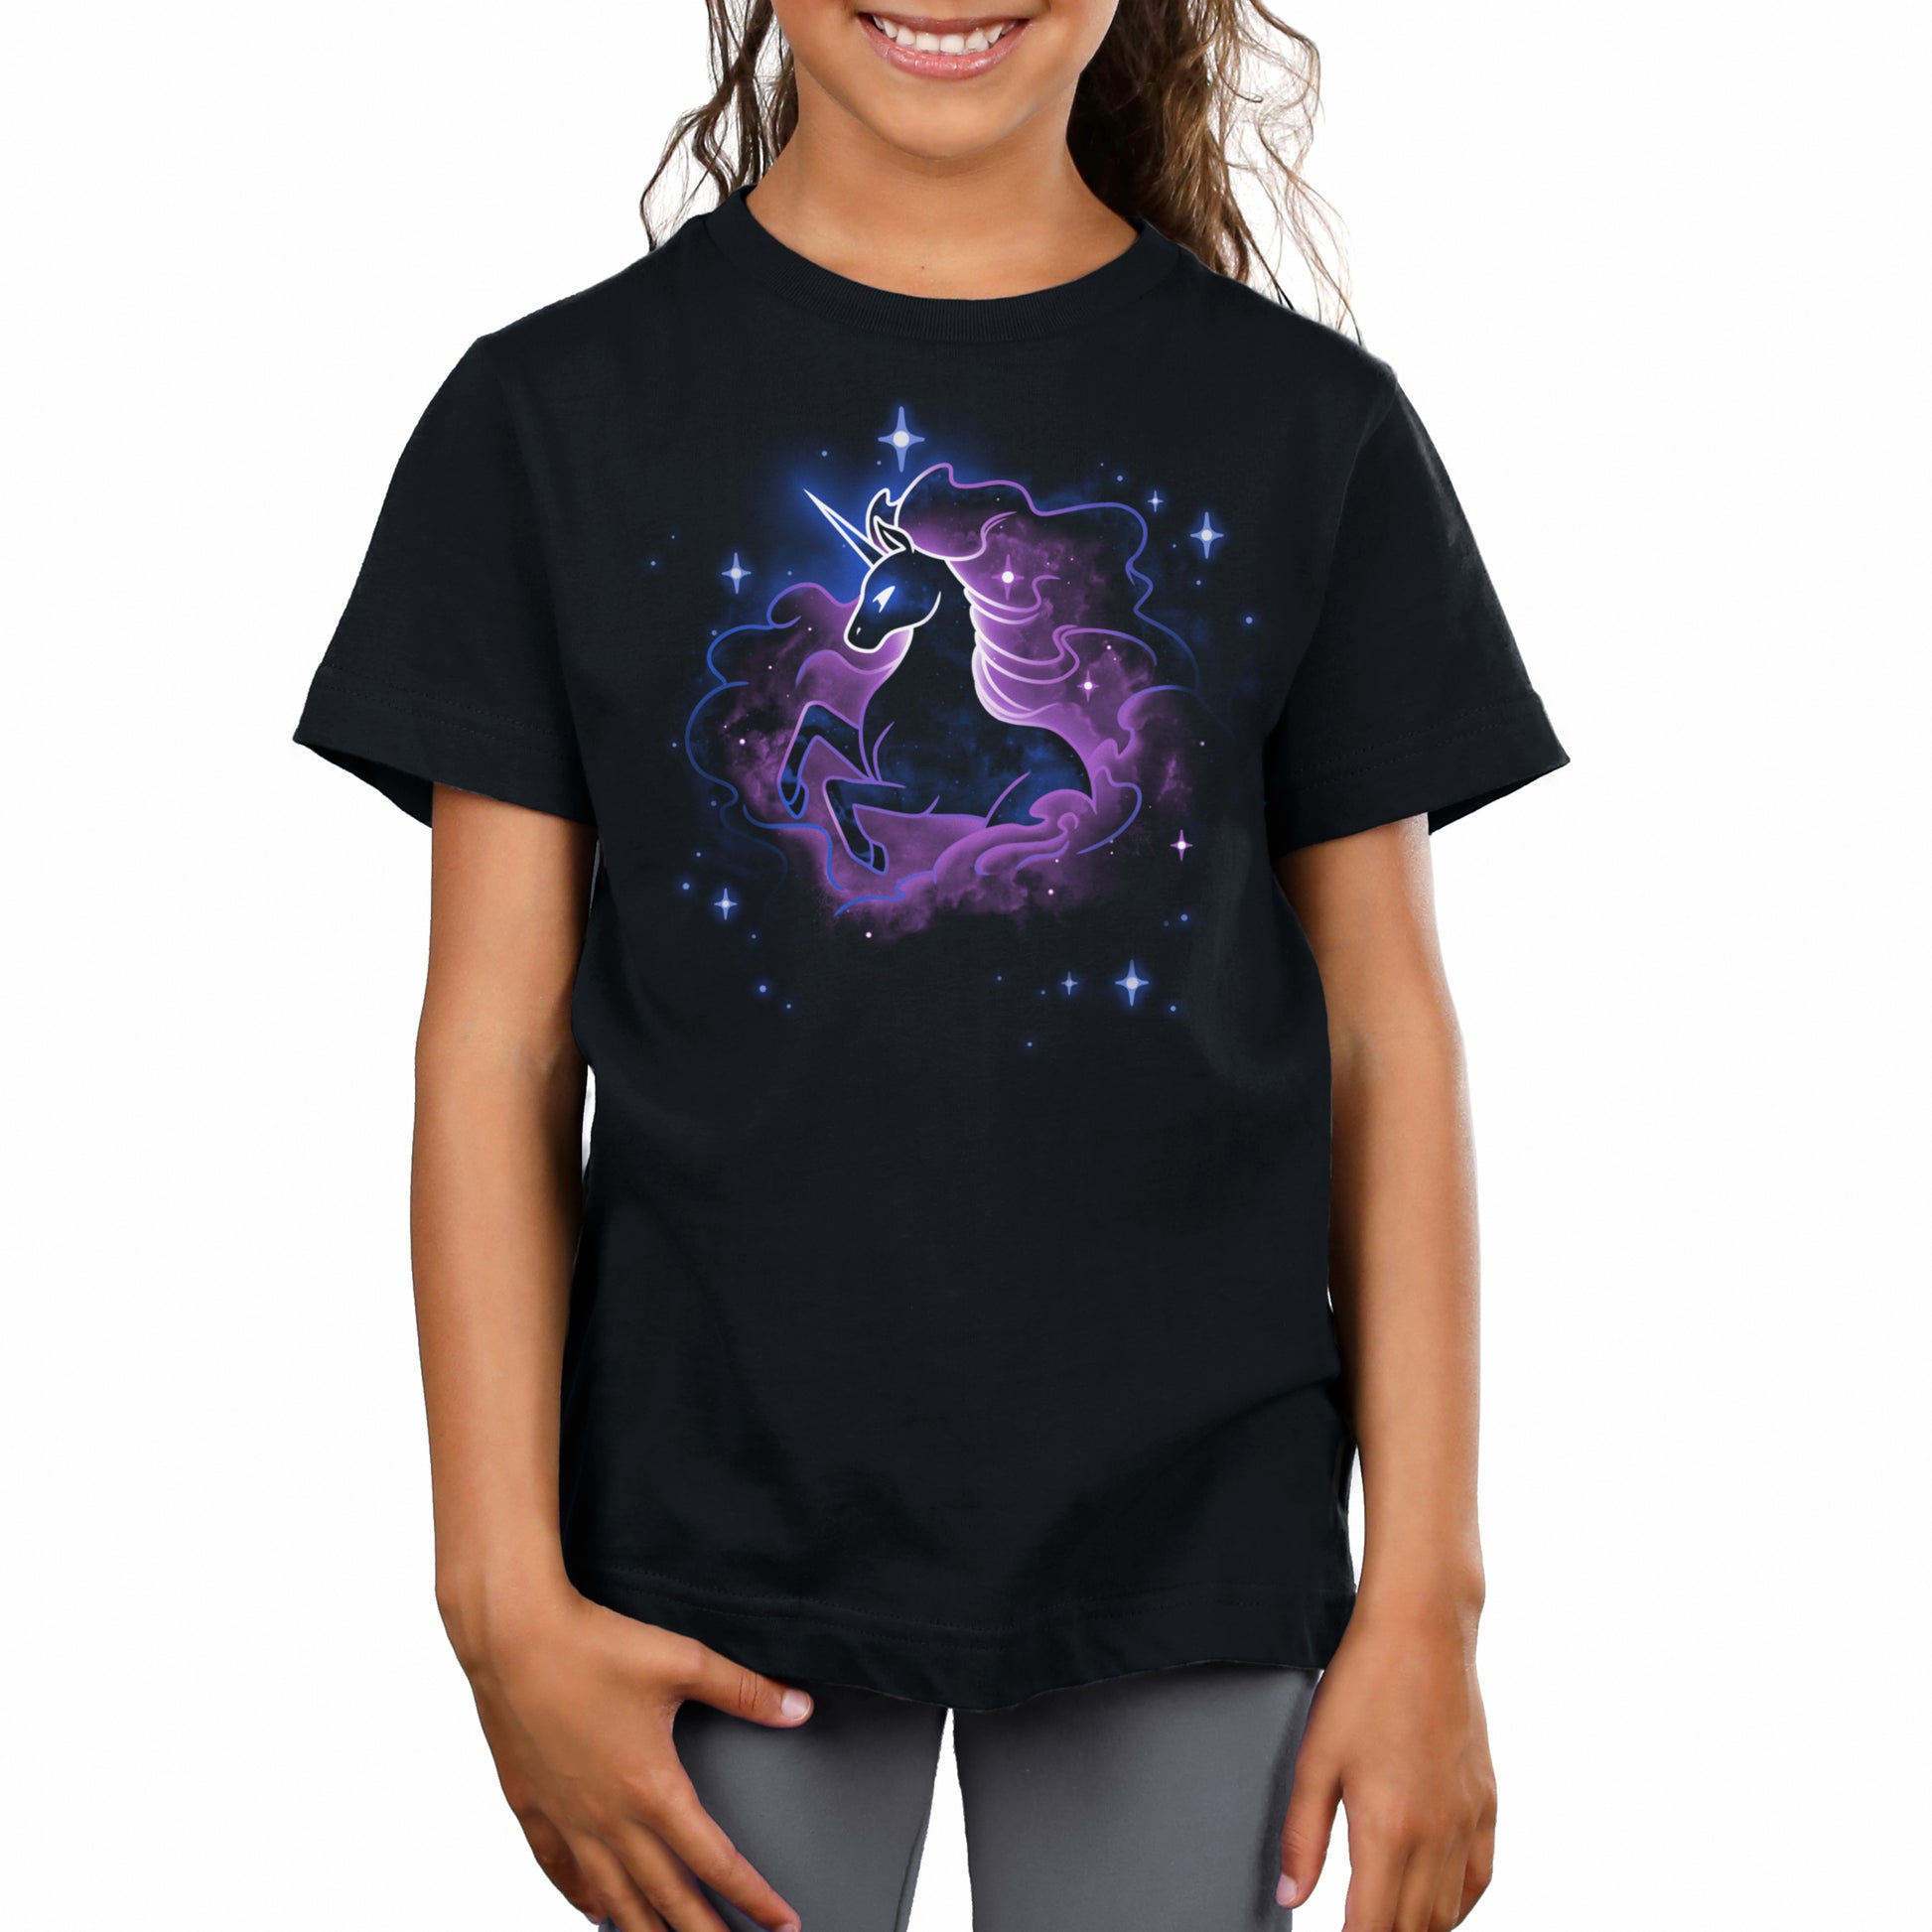 A girl wearing a Unicorn Nebula t-shirt from TeeTurtle with an image of a unicorn.